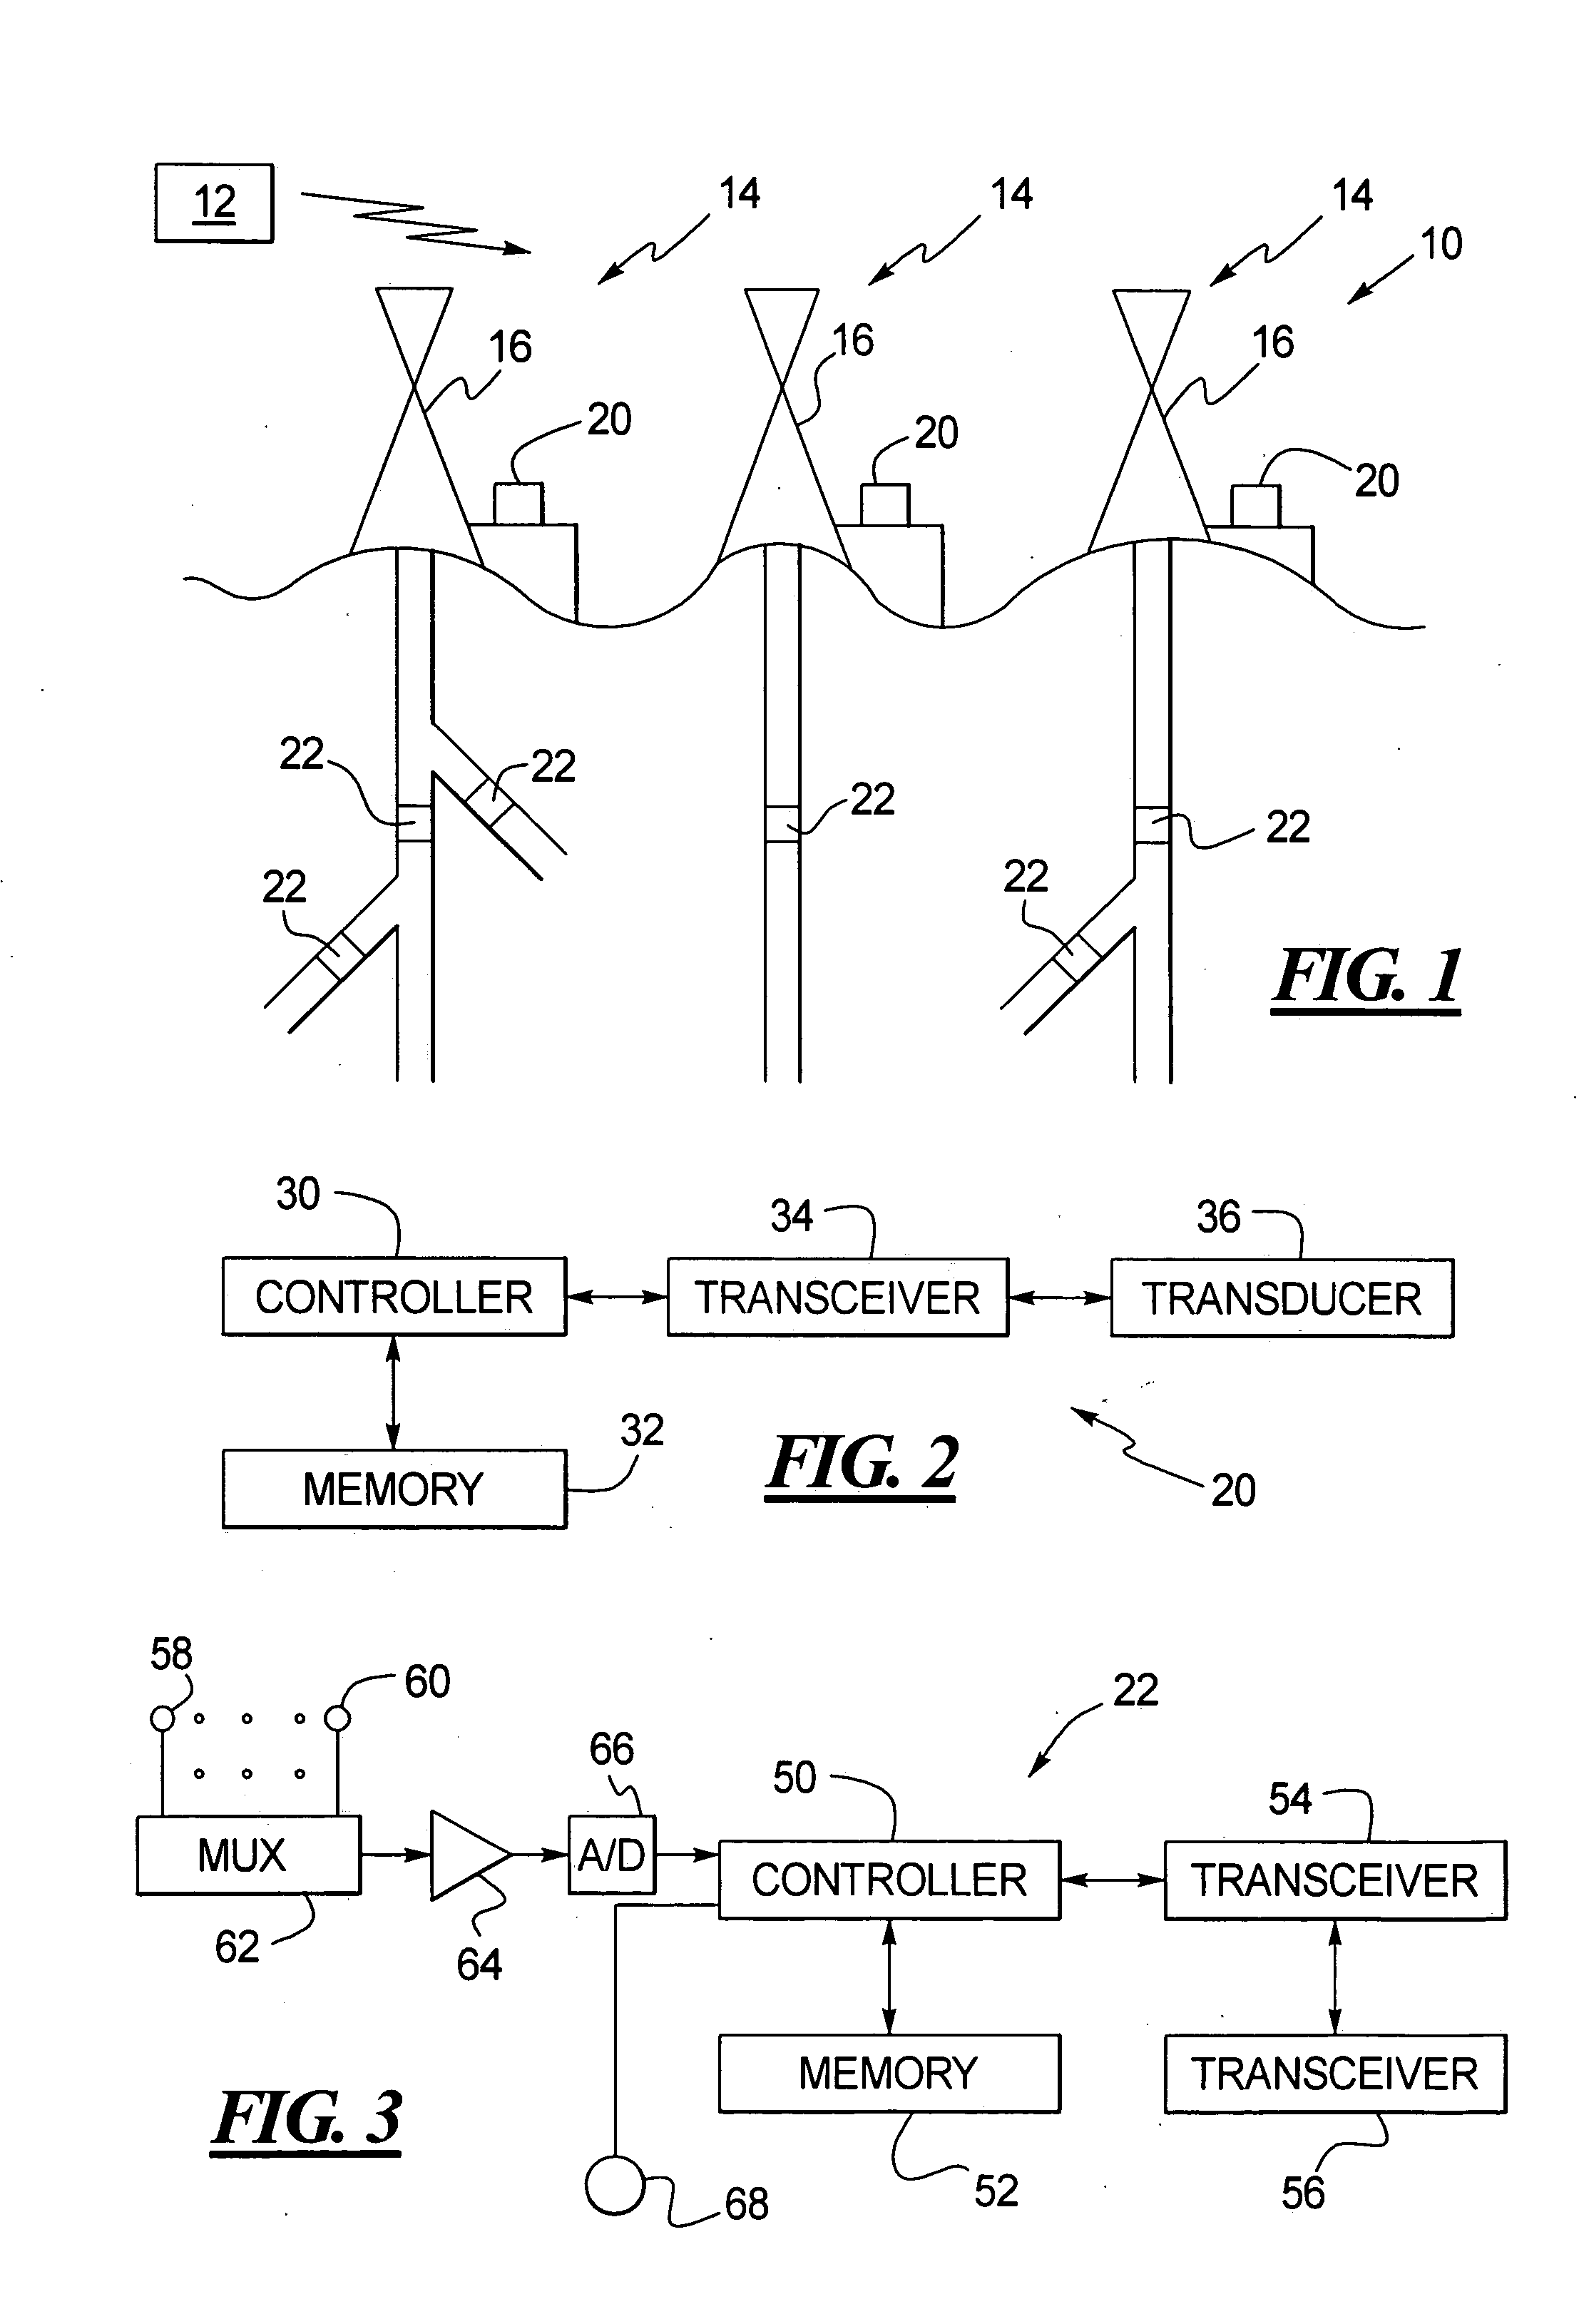 Well control and monitoring system using high temperature electronics